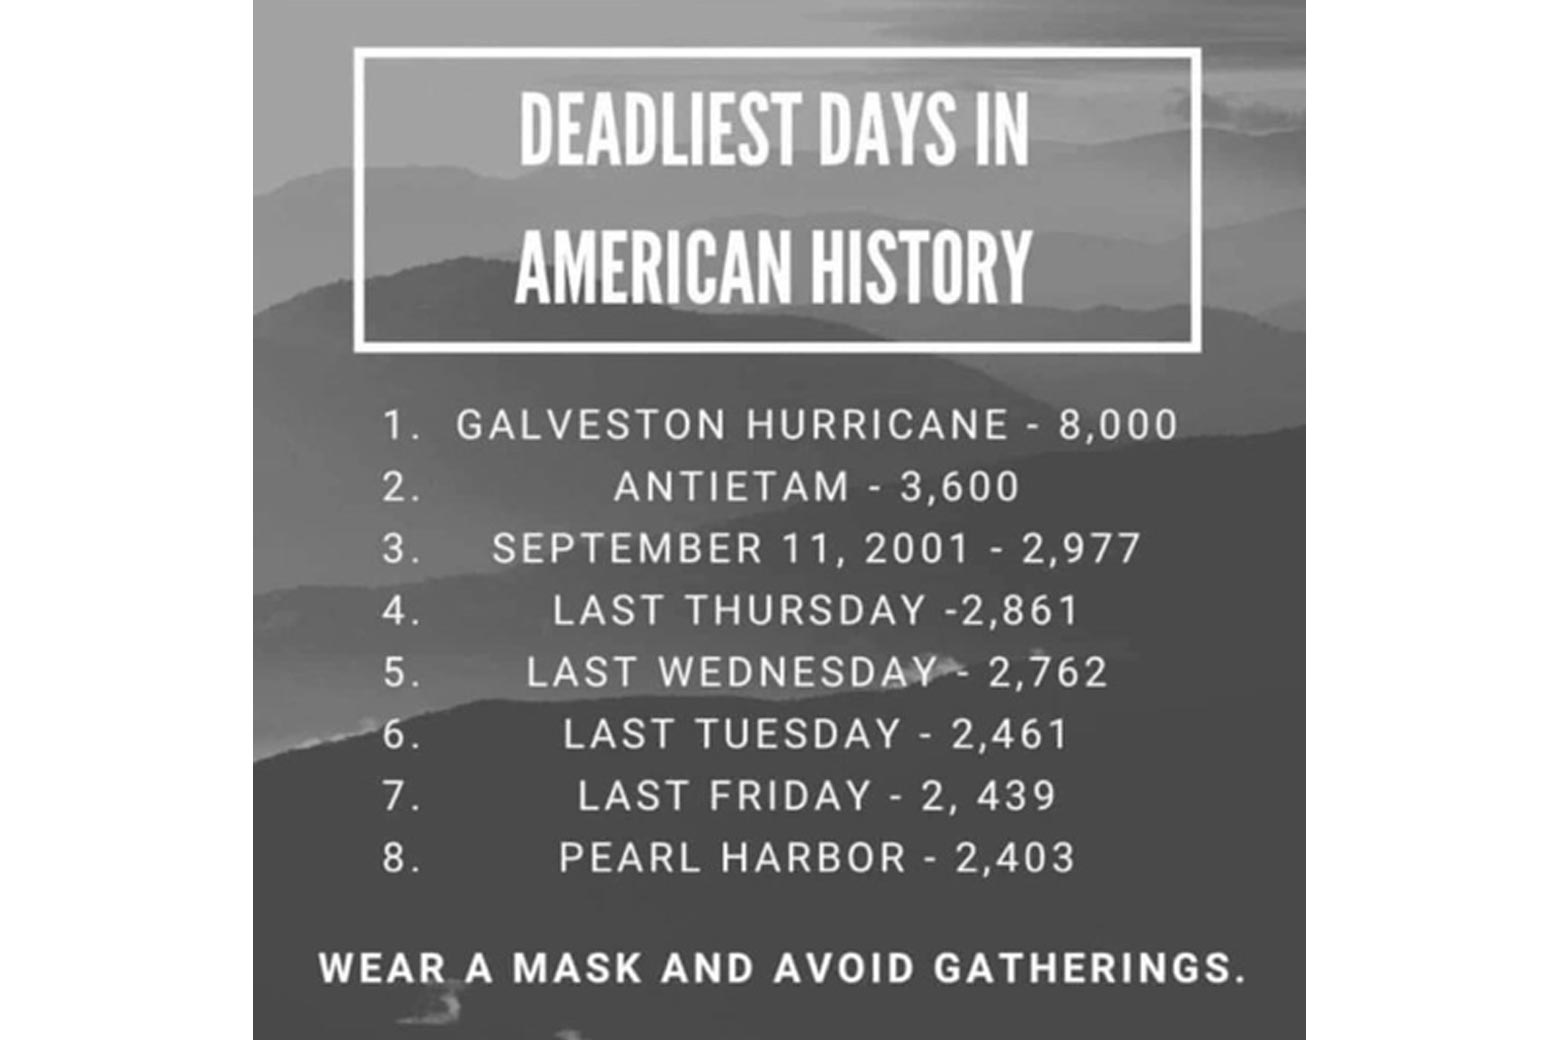 An infographic listing the "Deadliest Days in American History."